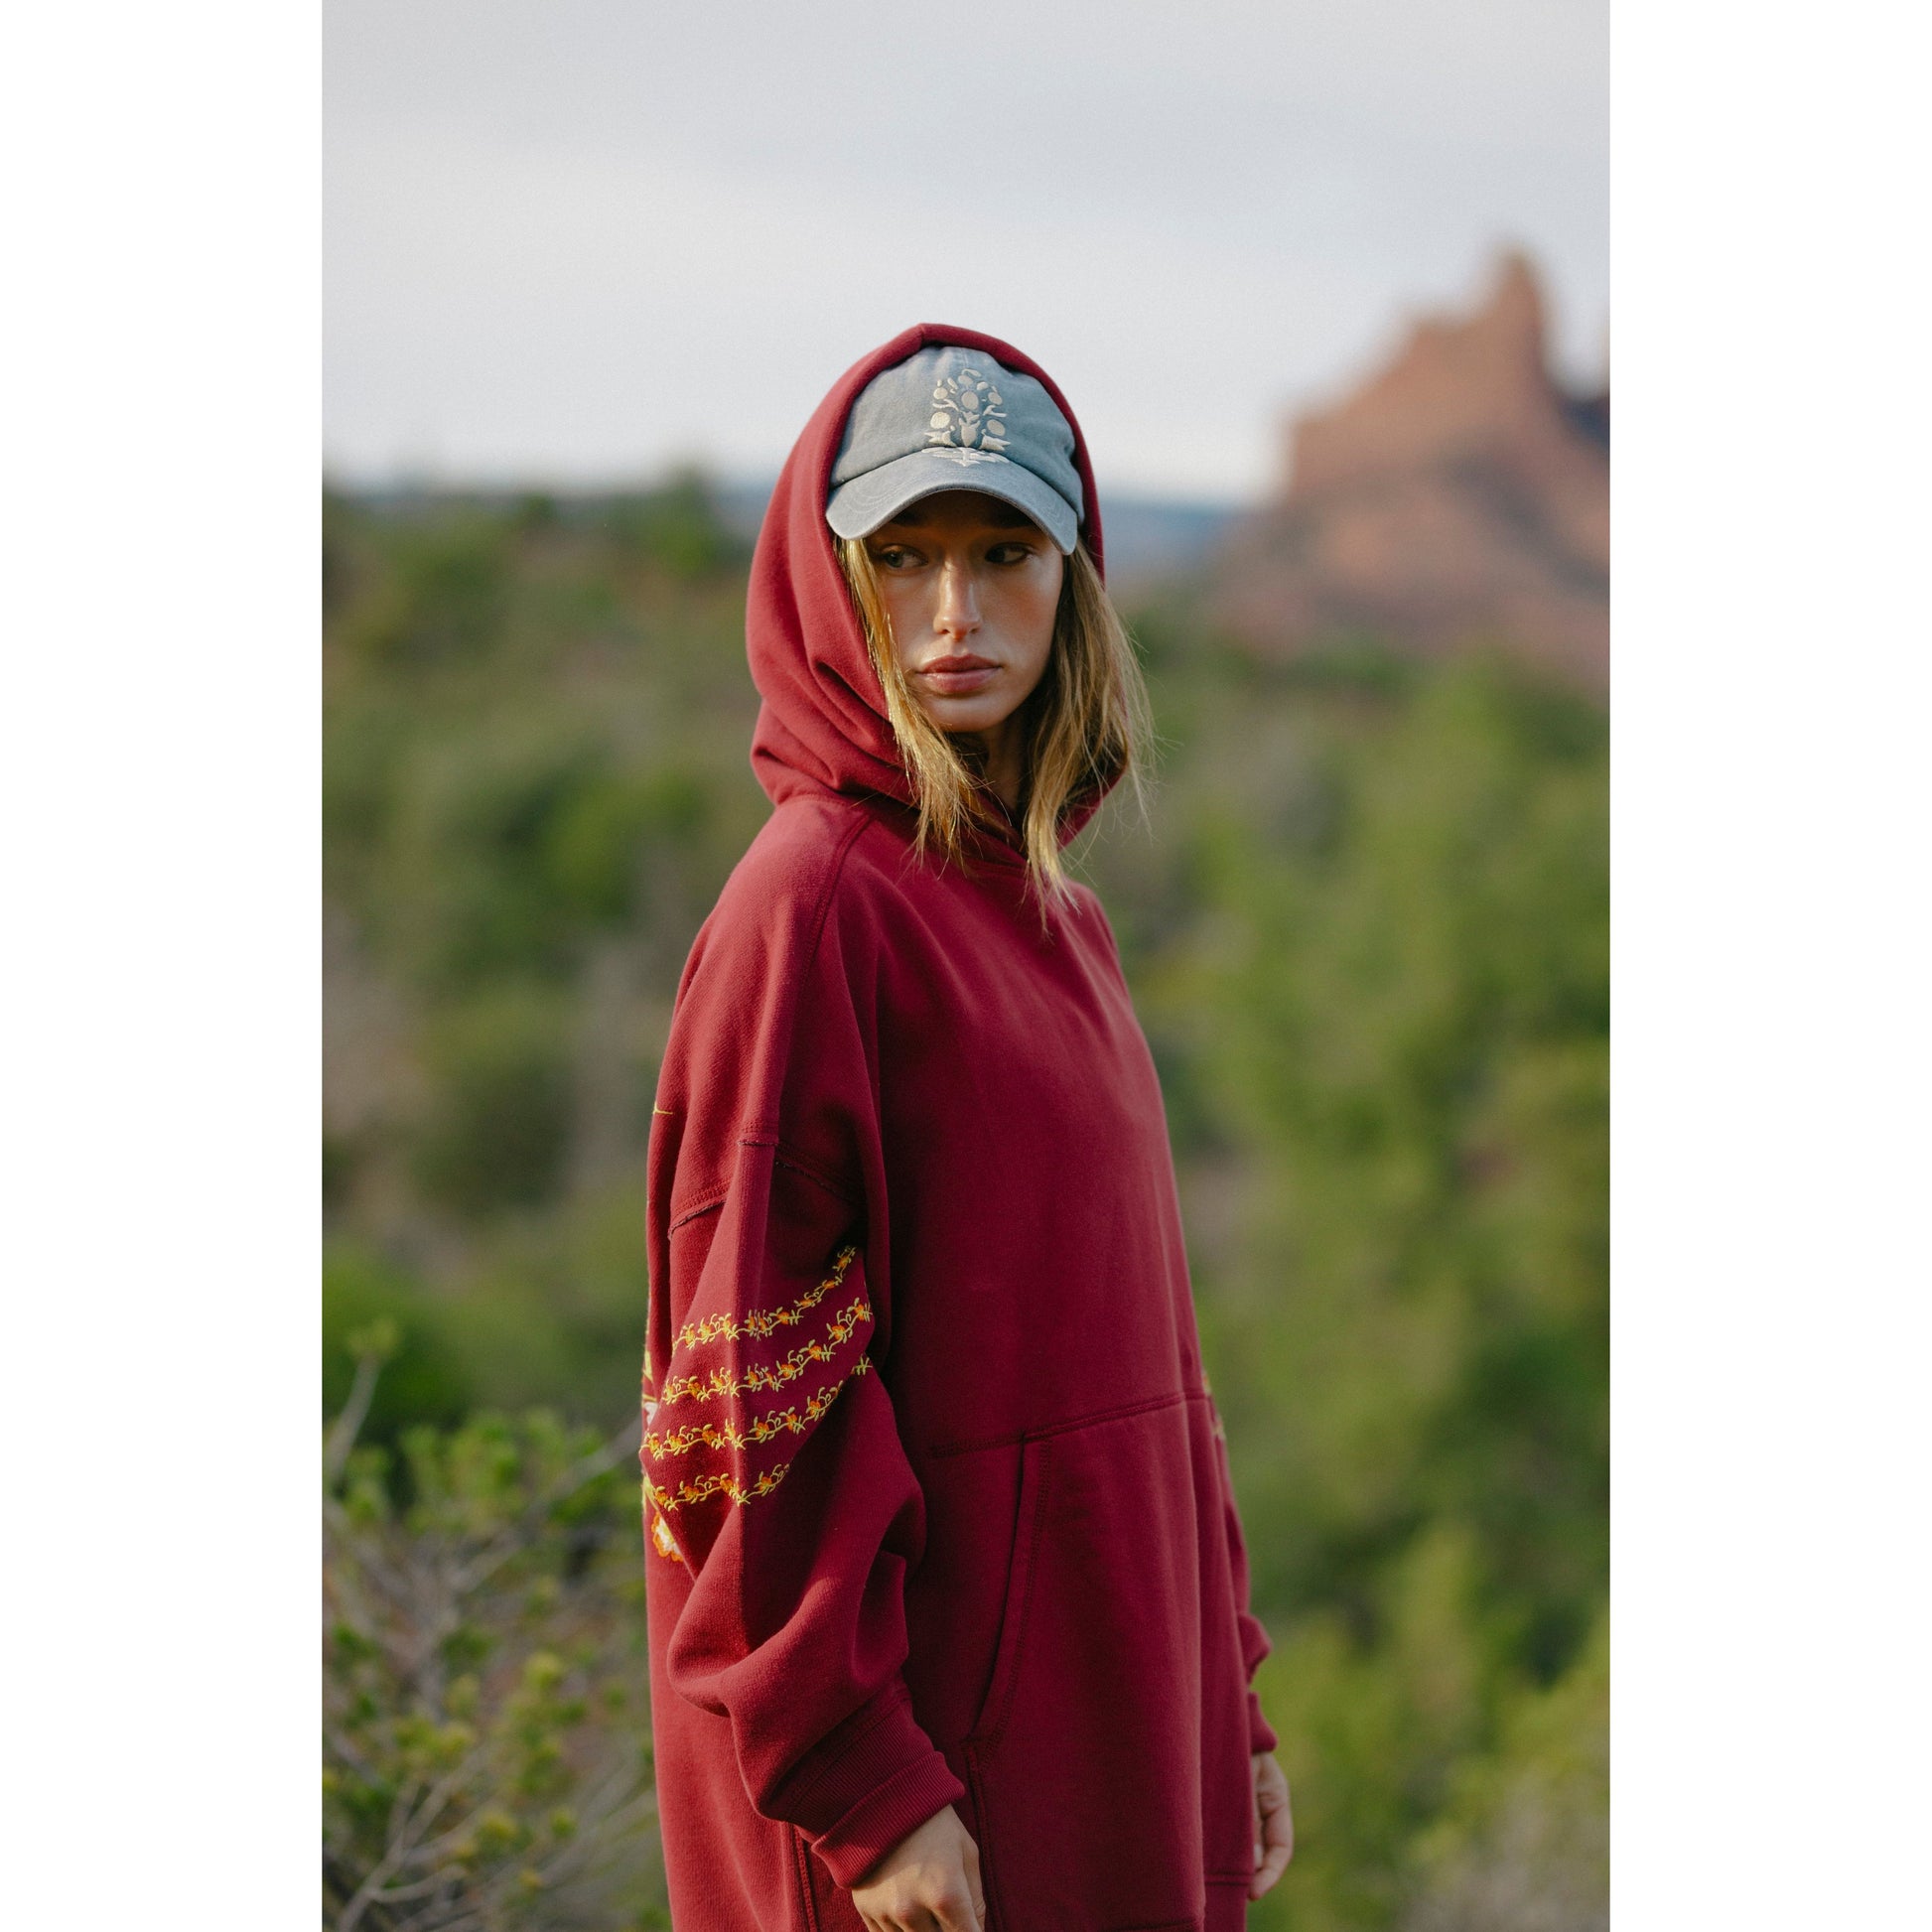 Woman in a red At My Best Embroidered Sweatshirt by Free People Movement with a kangaroo pocket, wearing a baseball cap, stands outdoors with a blurred desert landscape in the background.